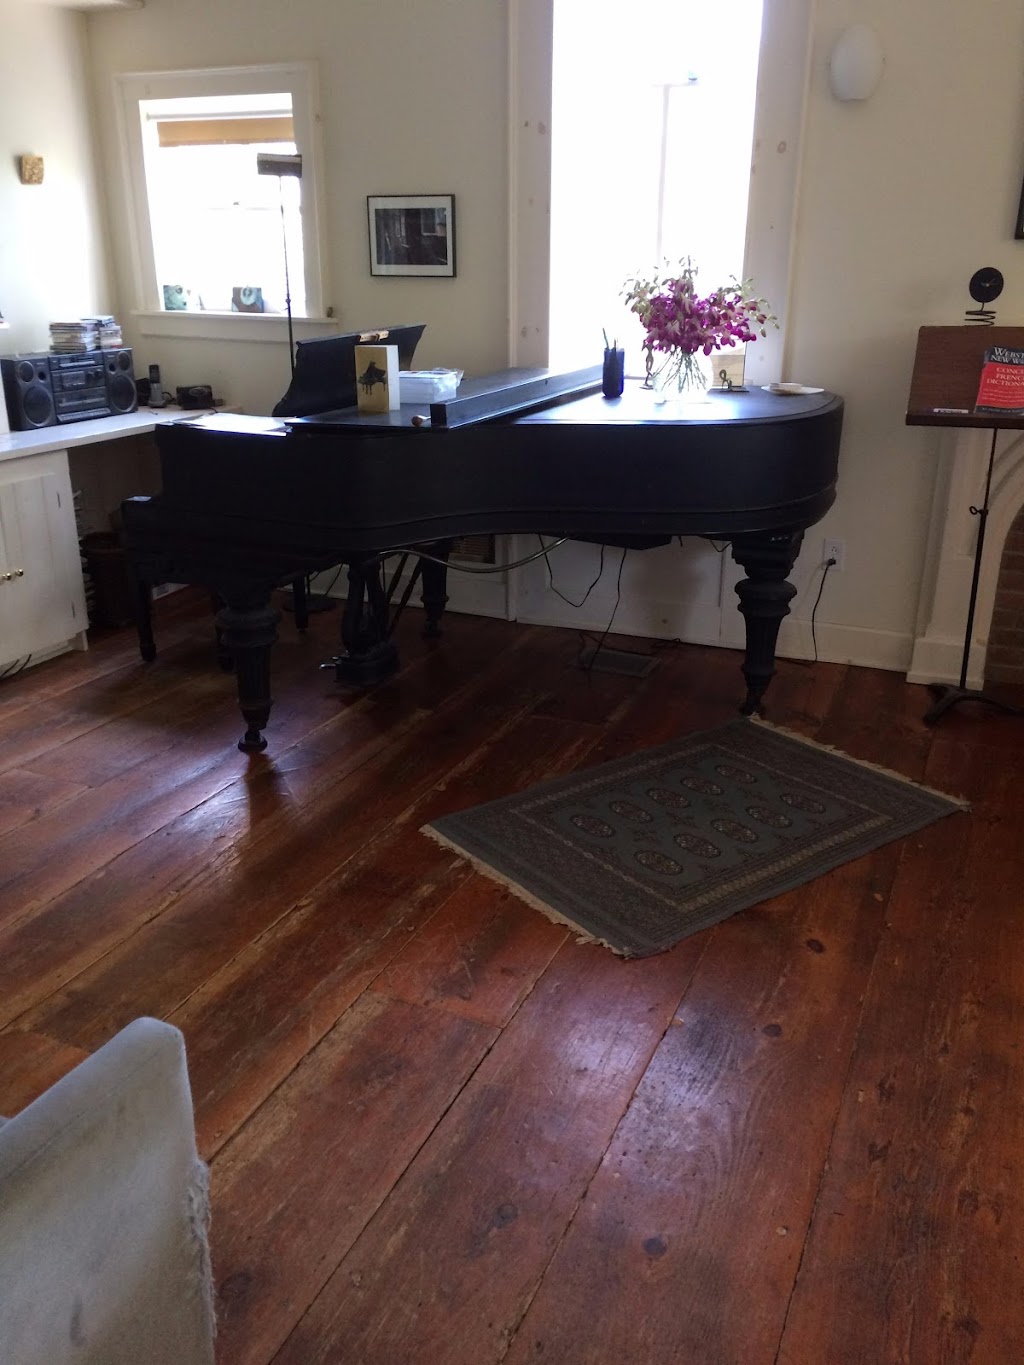 Pianists & Musician Retreats | 270 Northern Blvd, Germantown, NY 12526 | Phone: (518) 567-8749